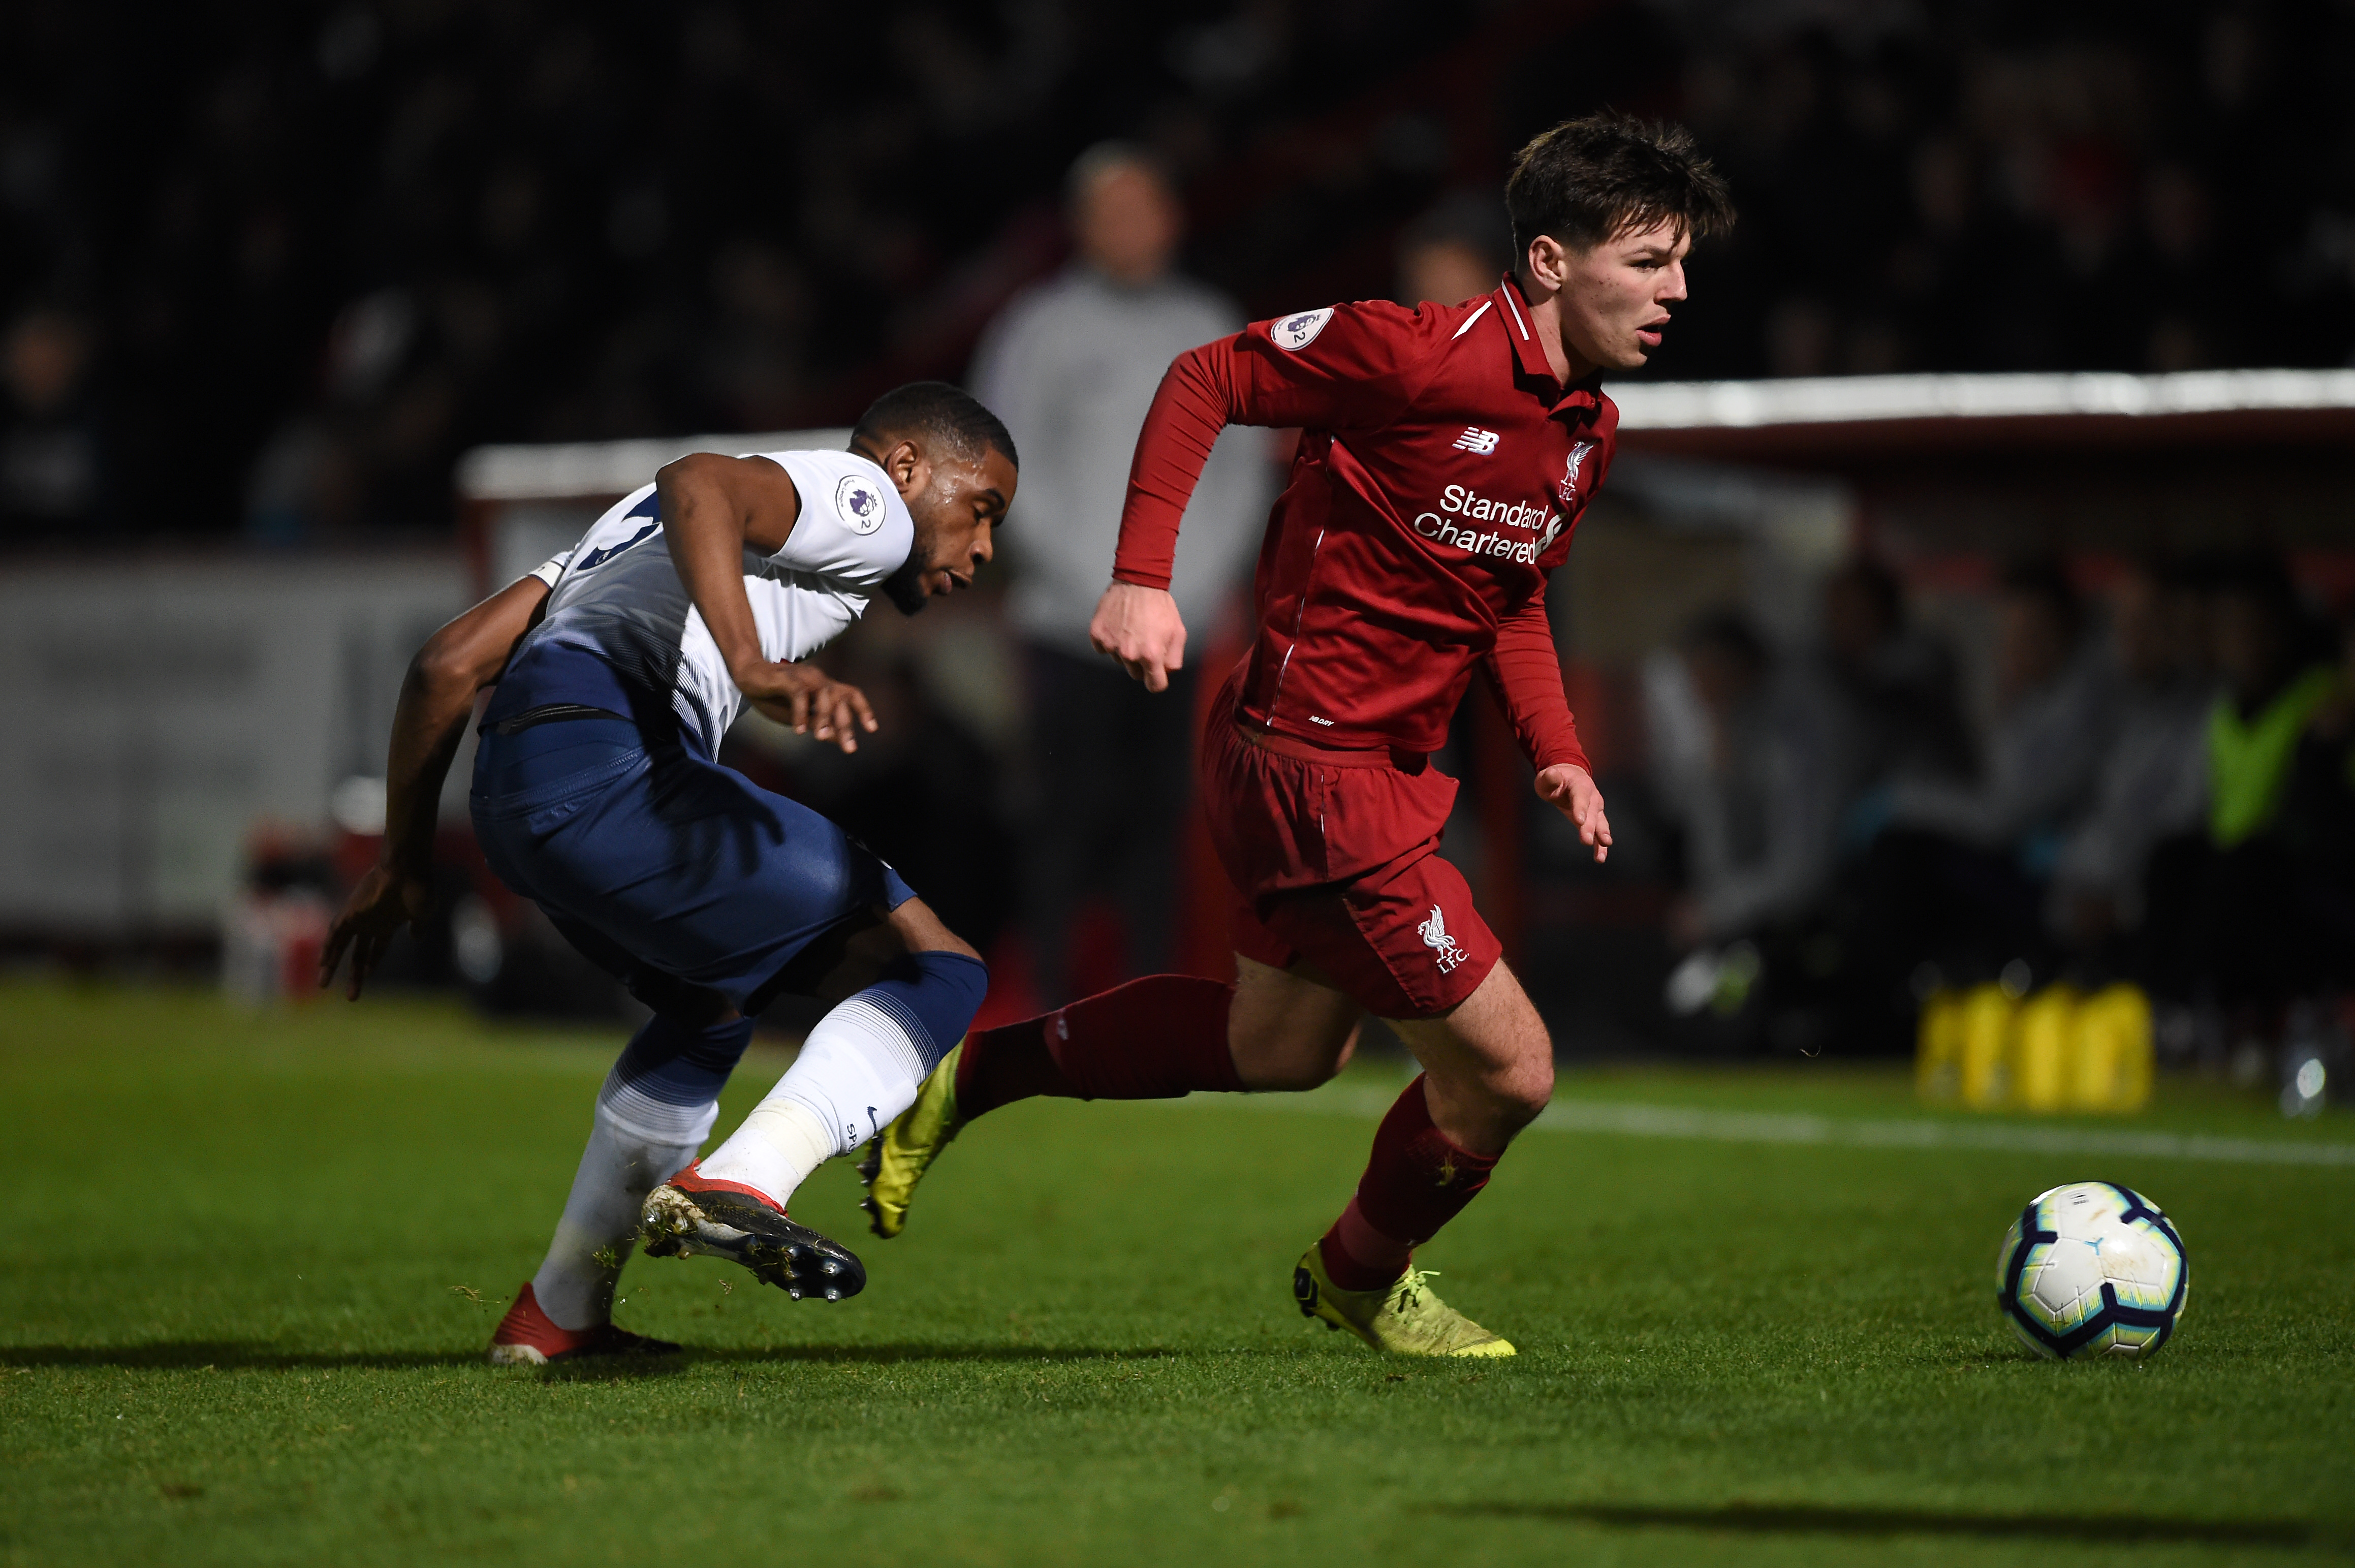 STEVENAGE, ENGLAND - JANUARY 07: Bobby Duncan of Liverpool is challenged by Japhet Tanganga of Tottenham Hotspur during the Premier League 2 match between Tottenham Hotspur and Liverpool at The Lamex Stadium on January 07, 2019 in Stevenage, England. (Photo by Harriet Lander/Getty Images)